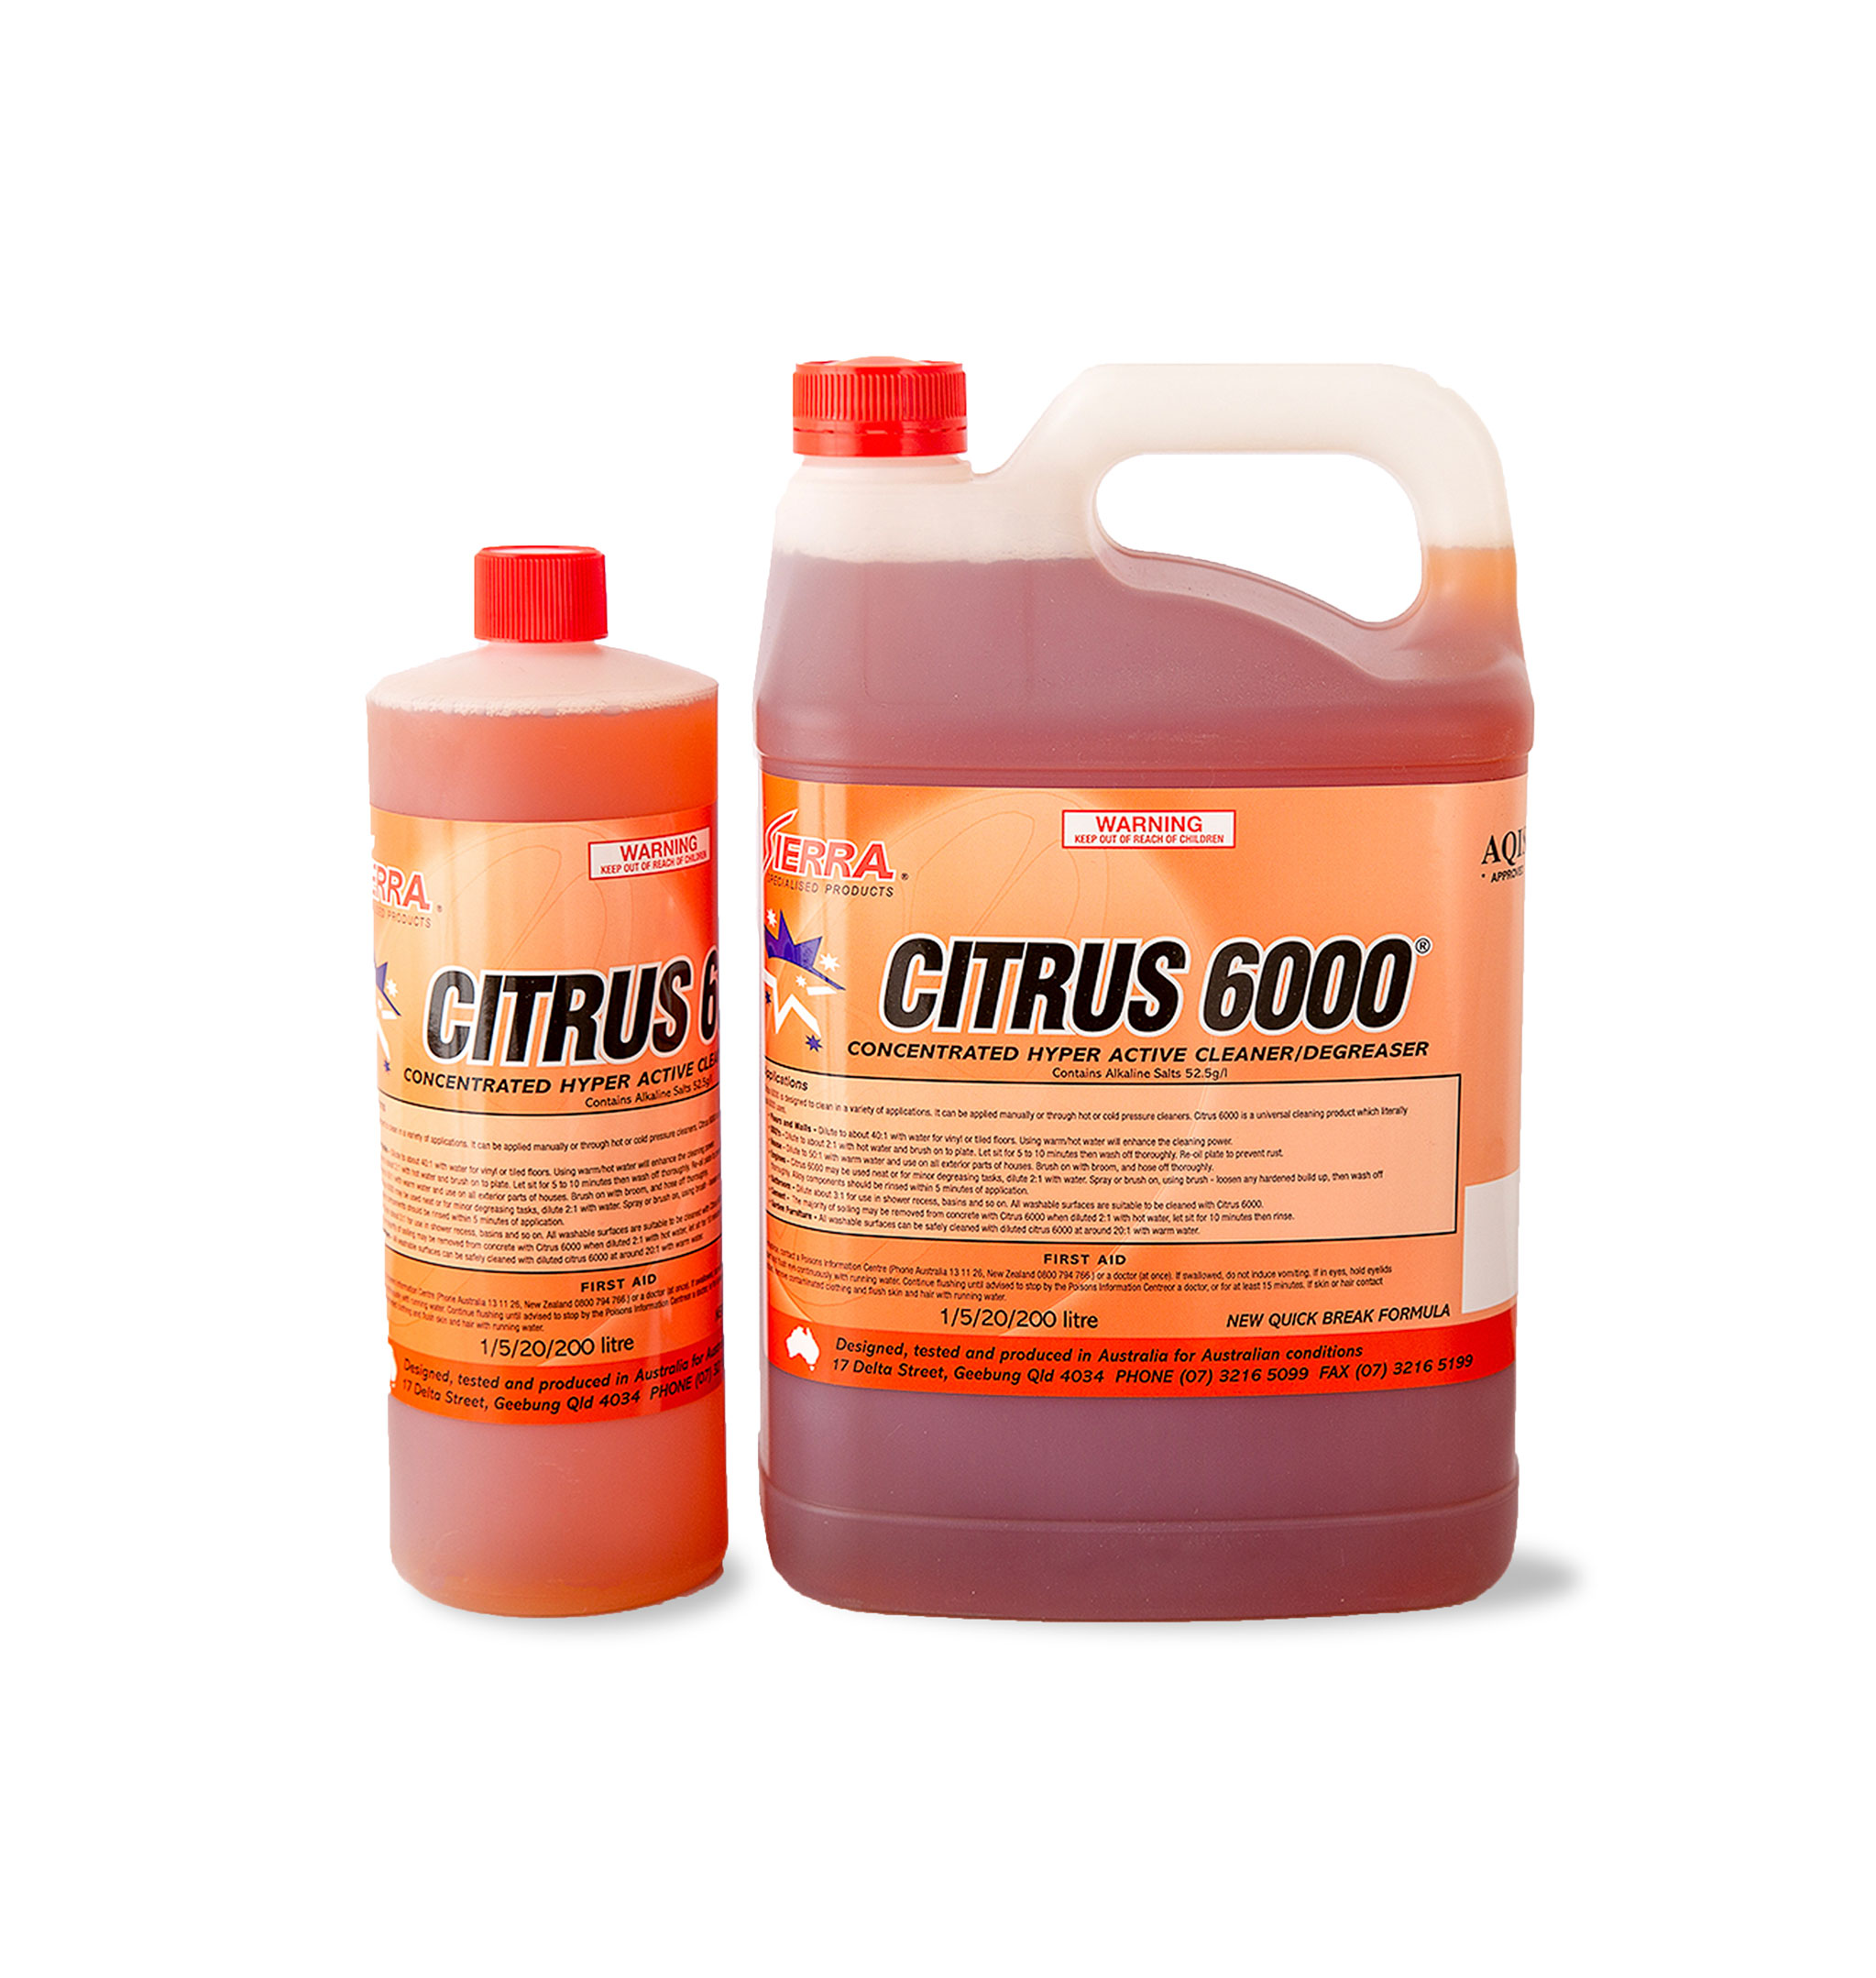 Citrus 6000 is an environmentally friendly citrus all purpose cleaner and degreaser